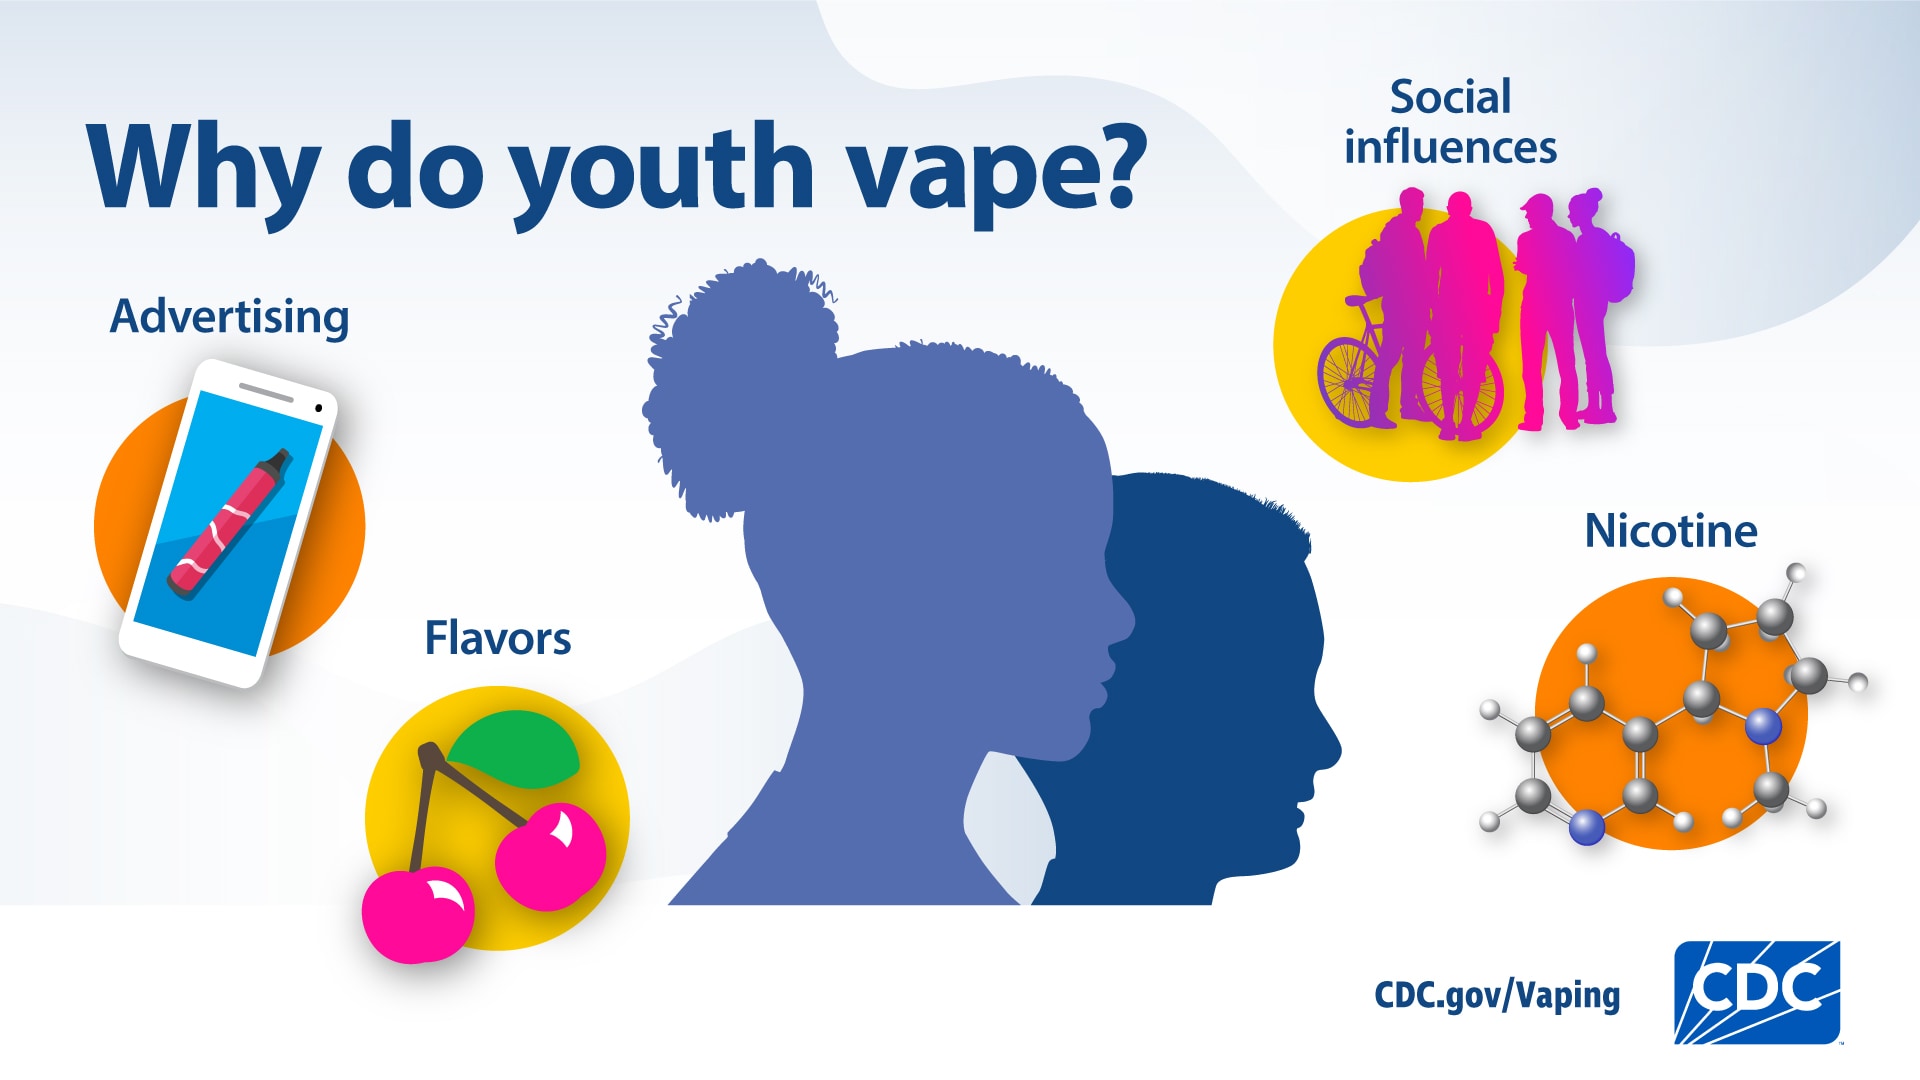 Visual depiction of some of the reasons youth vape